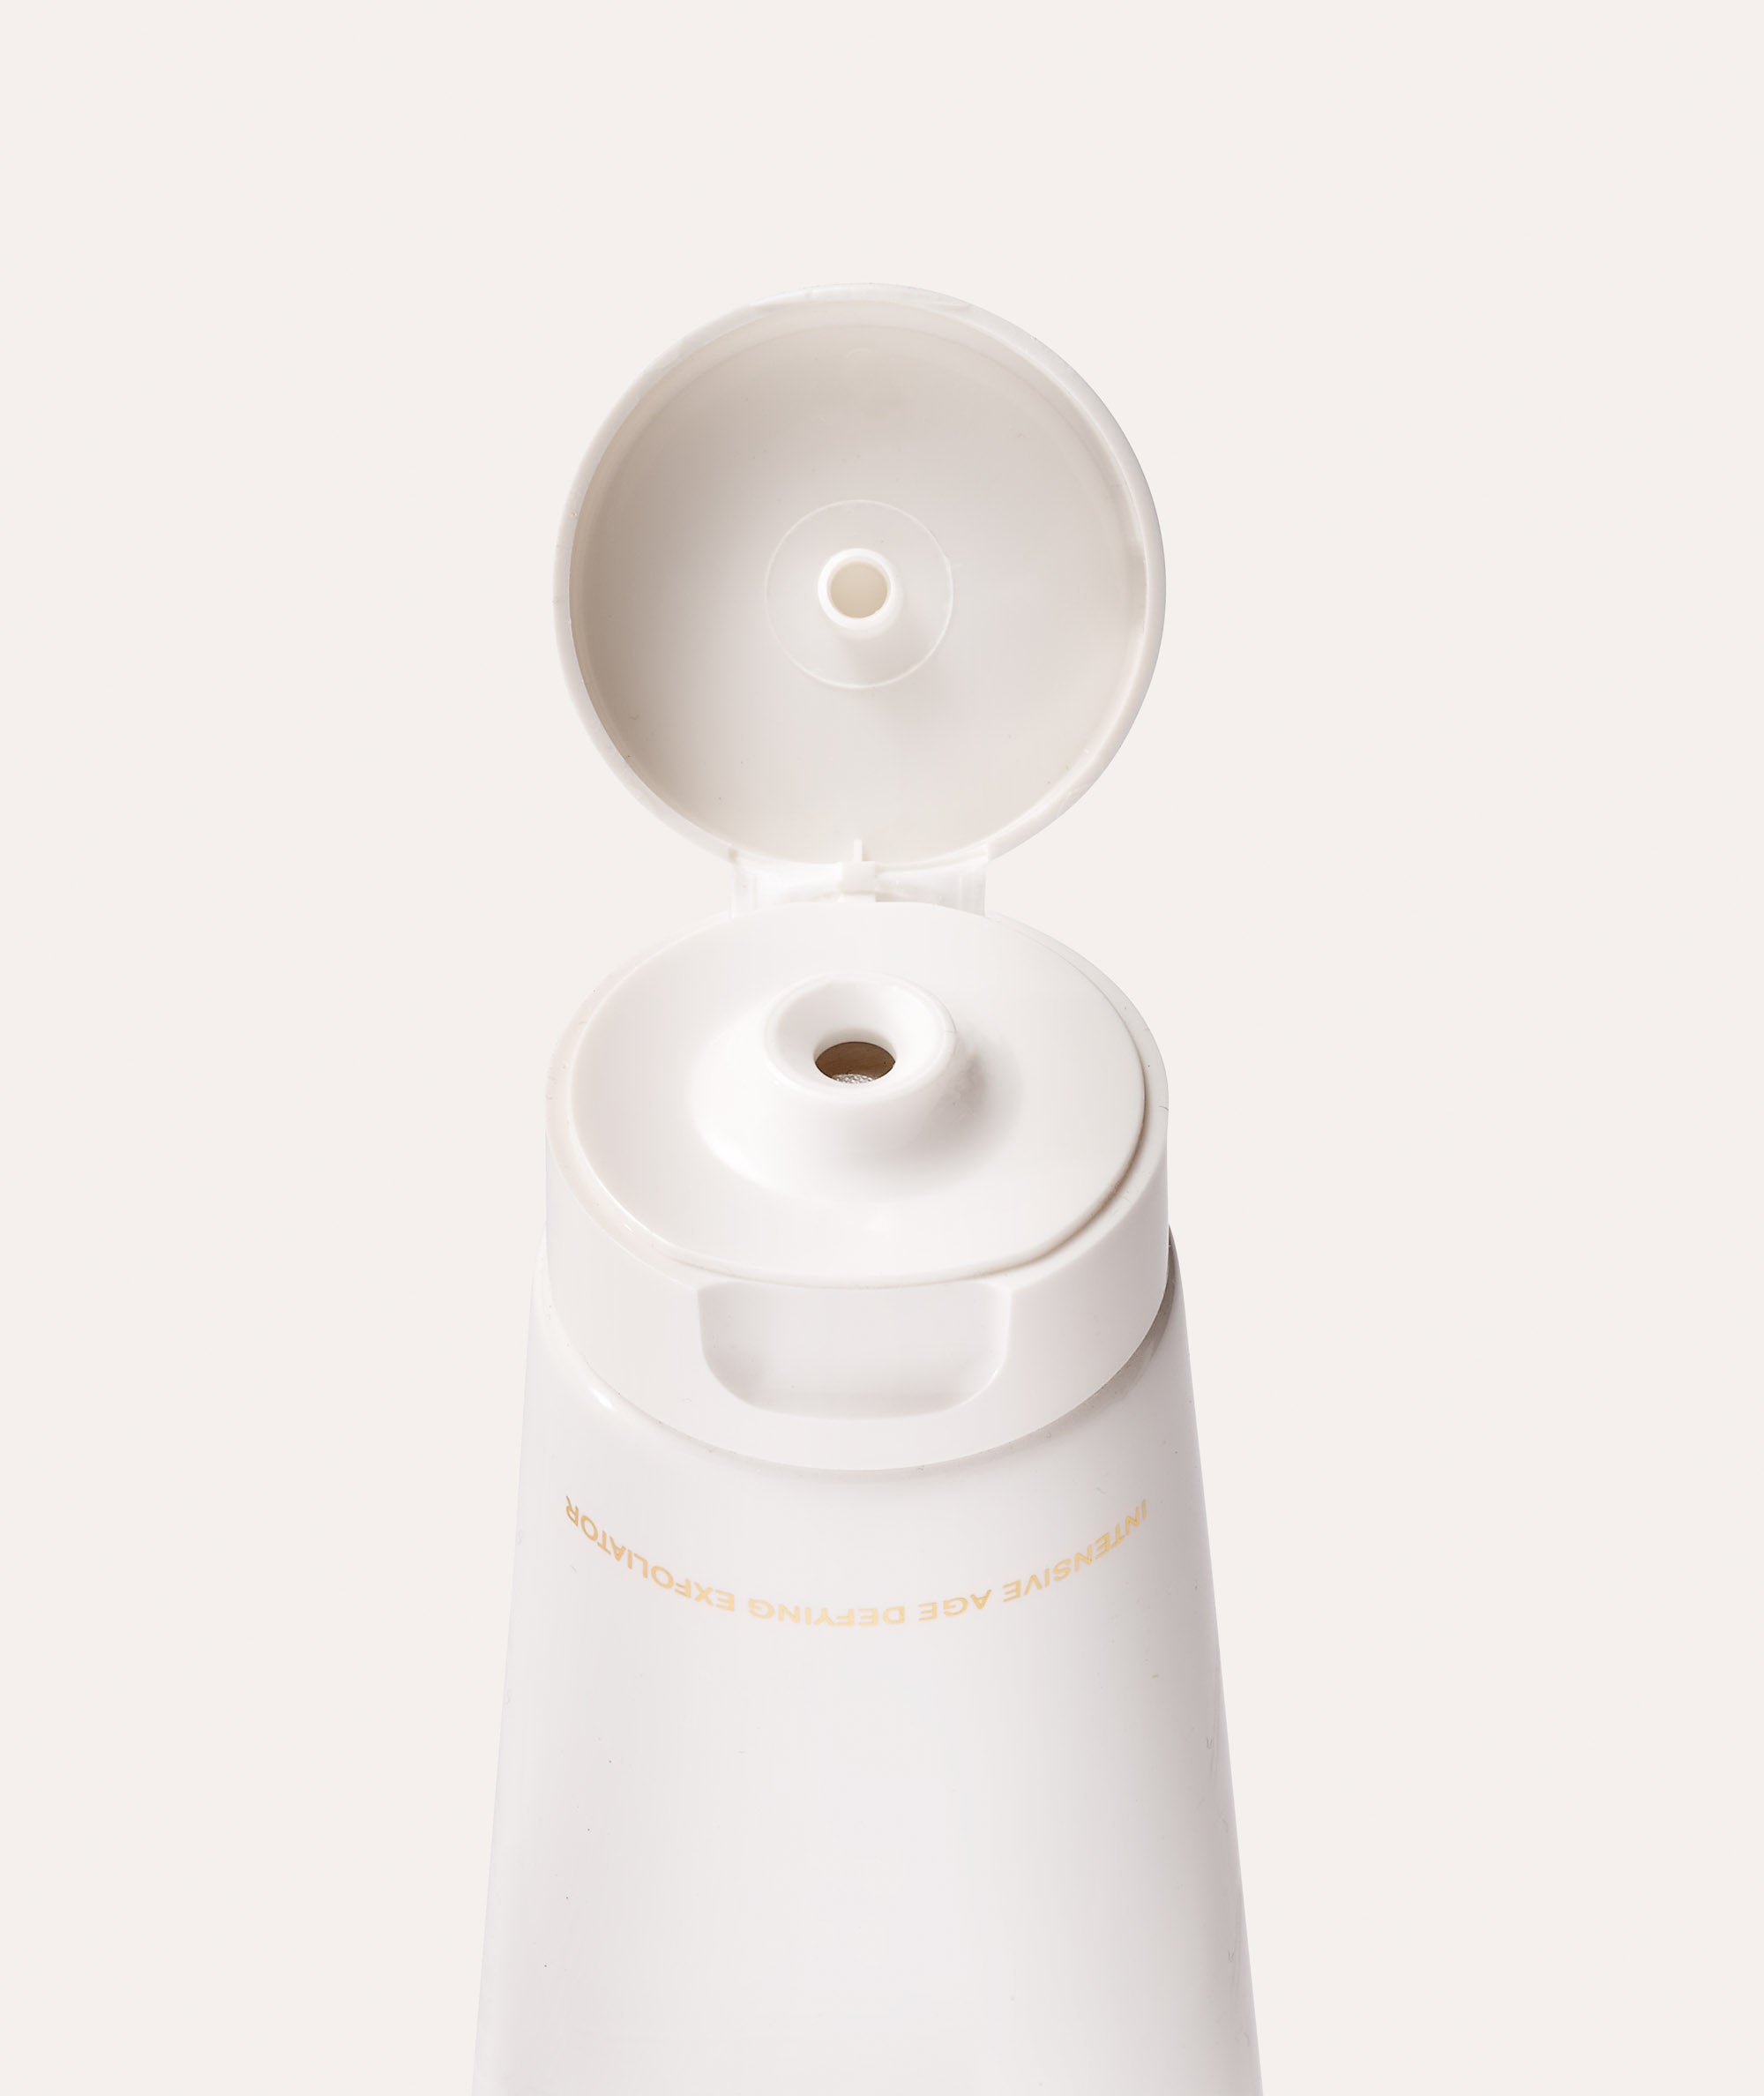 This is a picture of the Borghese Intensive Age Defying Exfoliator dispenser and cap